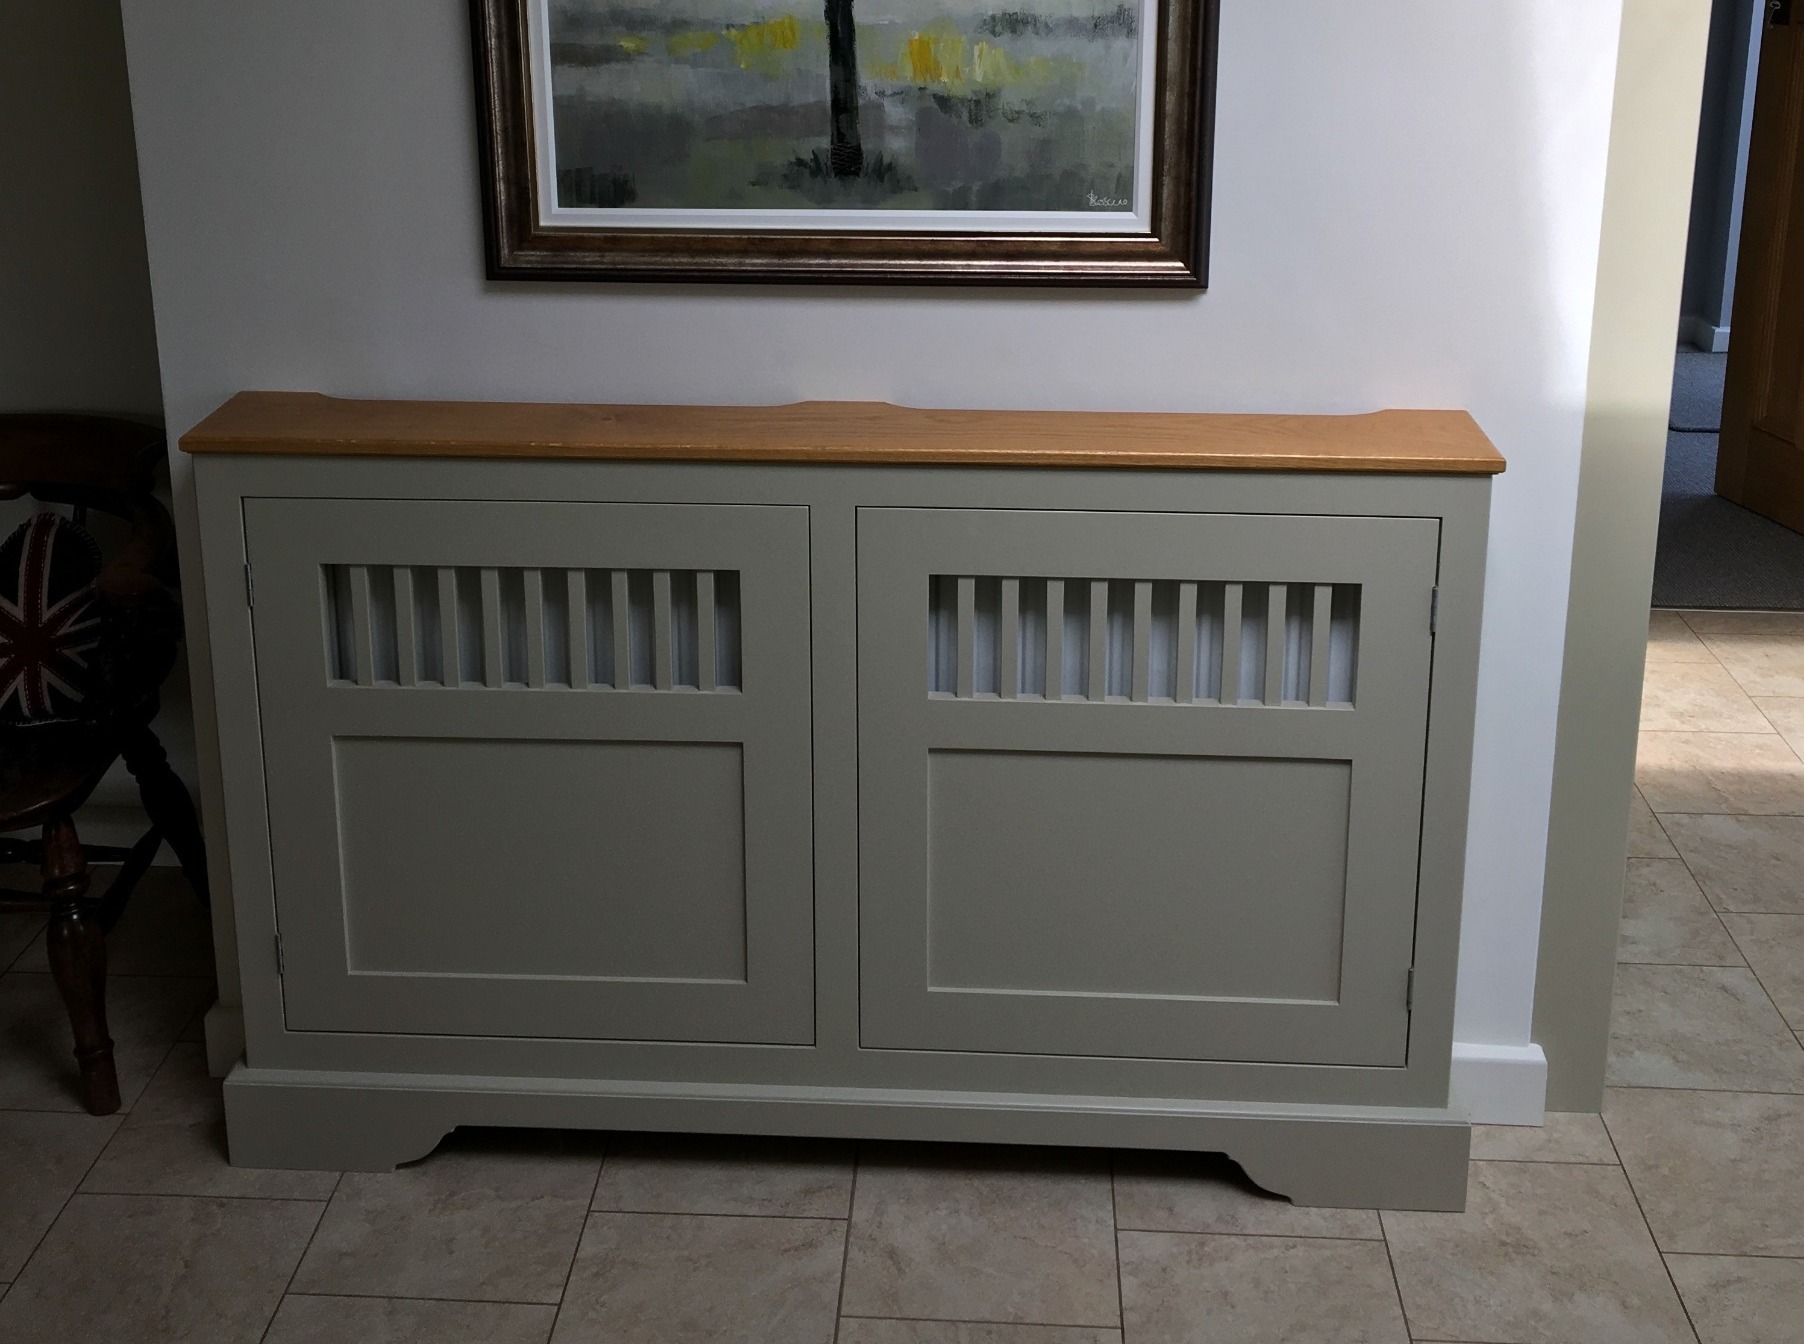 In-frame radiator cover with timber top